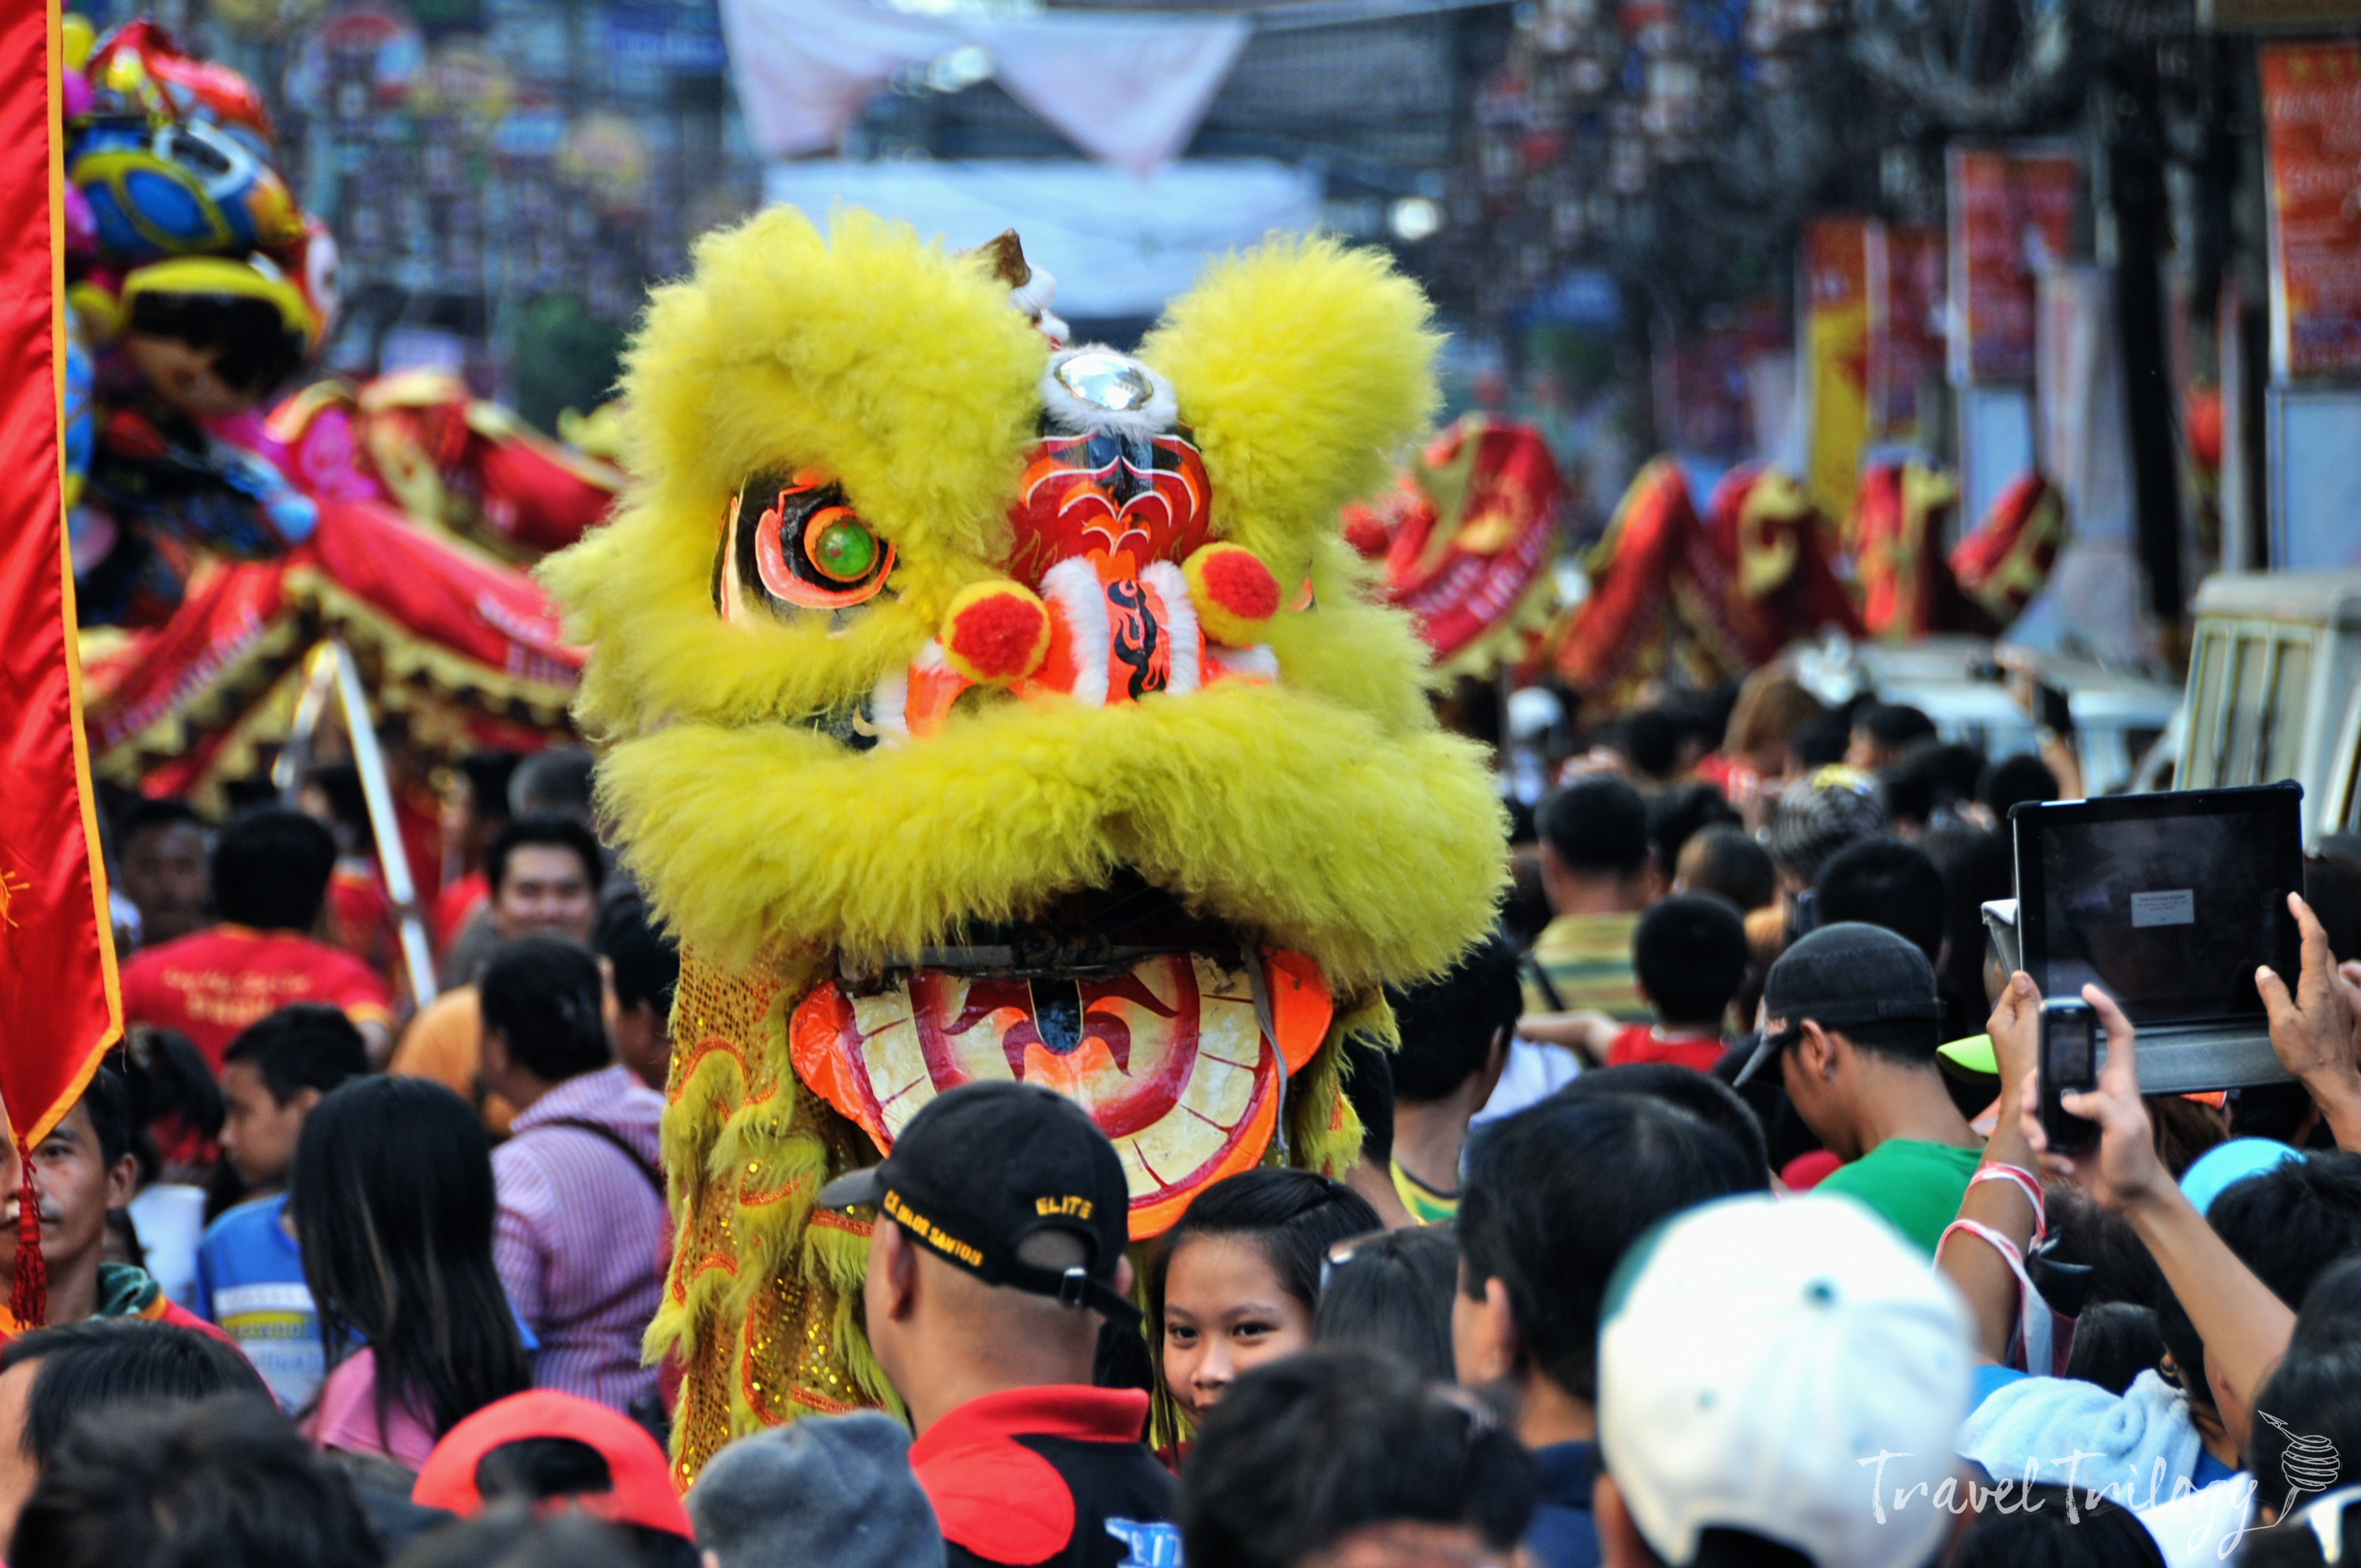 Dancing lion amidst the crowd of revelers during the Chinese New Year.